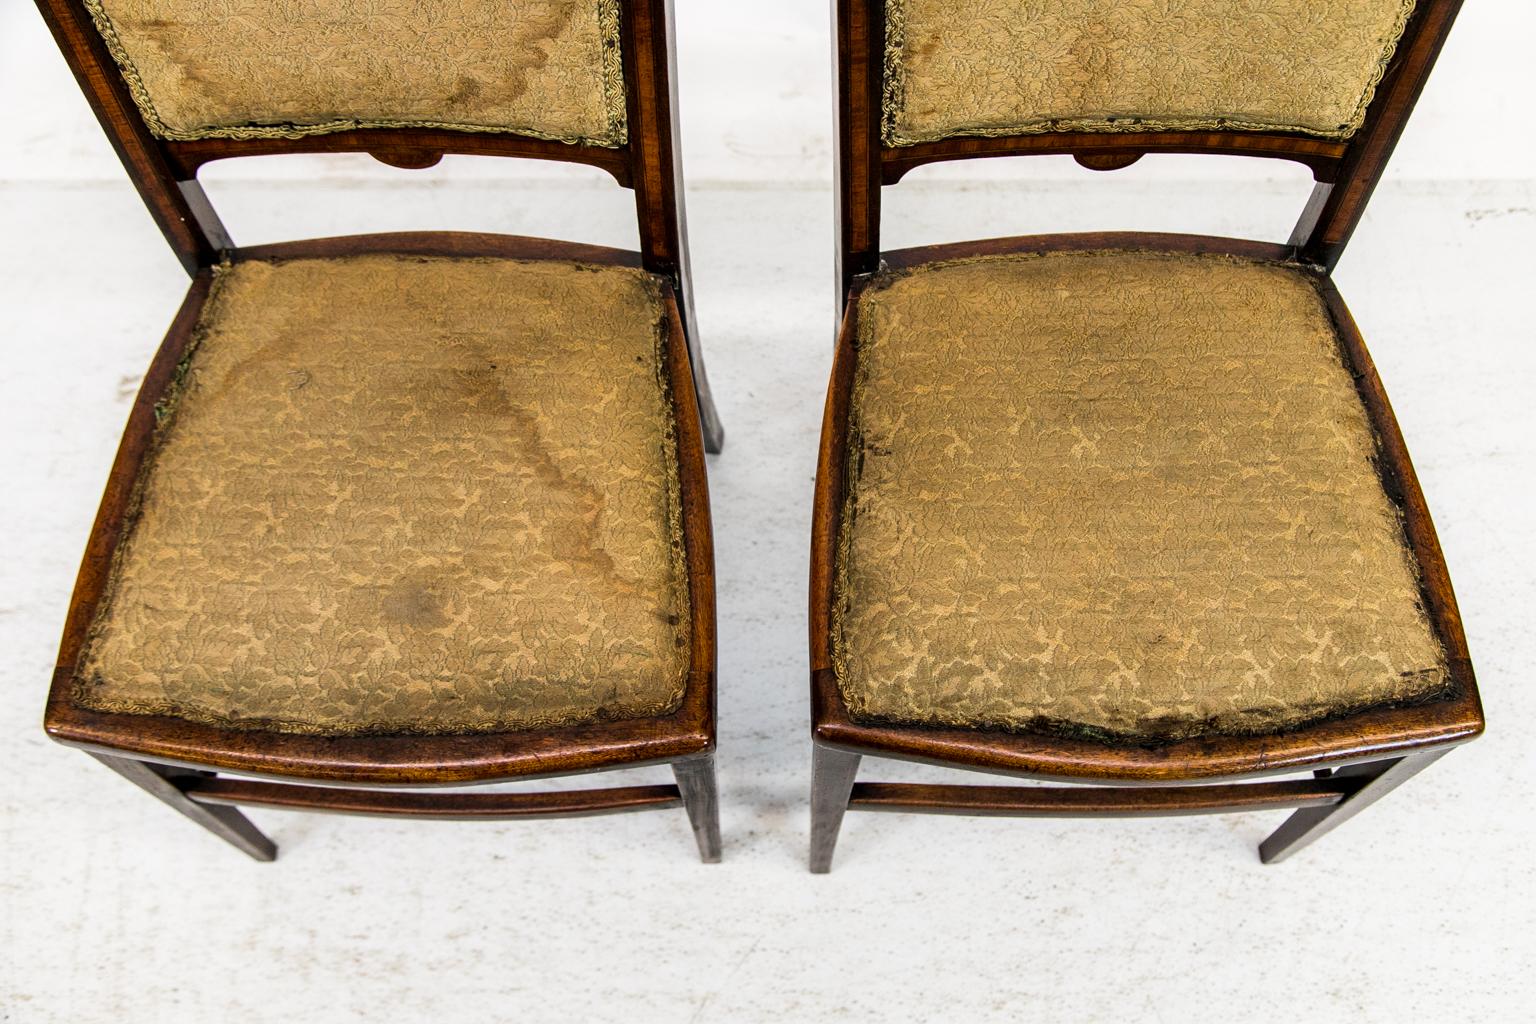 Each inlaid Edwardian chair has a shaped crest rail that is inlaid with boxwood stringing that frames inlaid arabesque panels. The side stiles and cross rails in the back are inlaid with satinwood panels framed with boxwood and ebony line inlays.